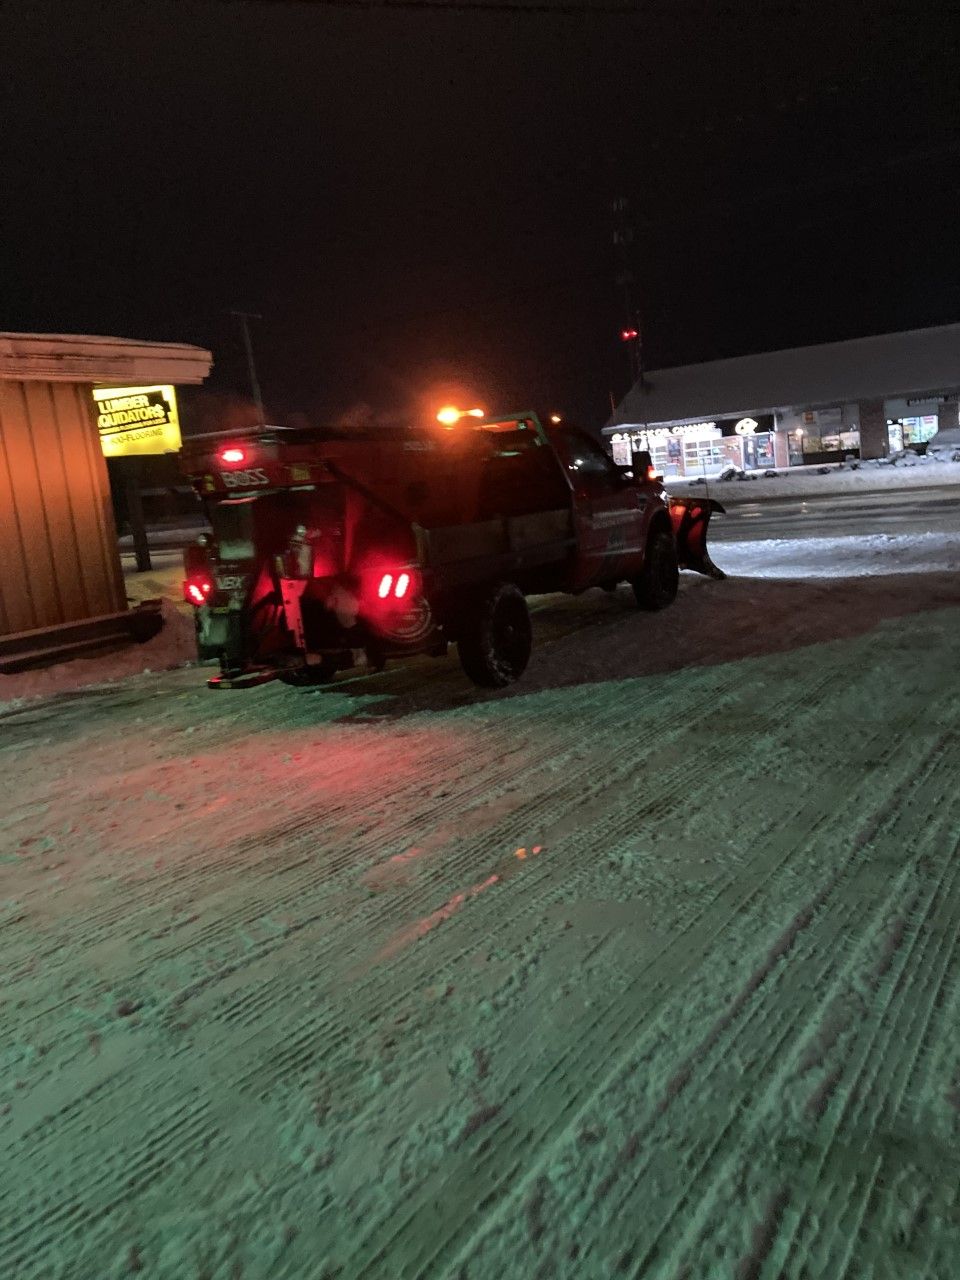 Dependable Salting and Sanding Solutions for Private Subdivision and Community Roads During Winter Months in Northern Michigan